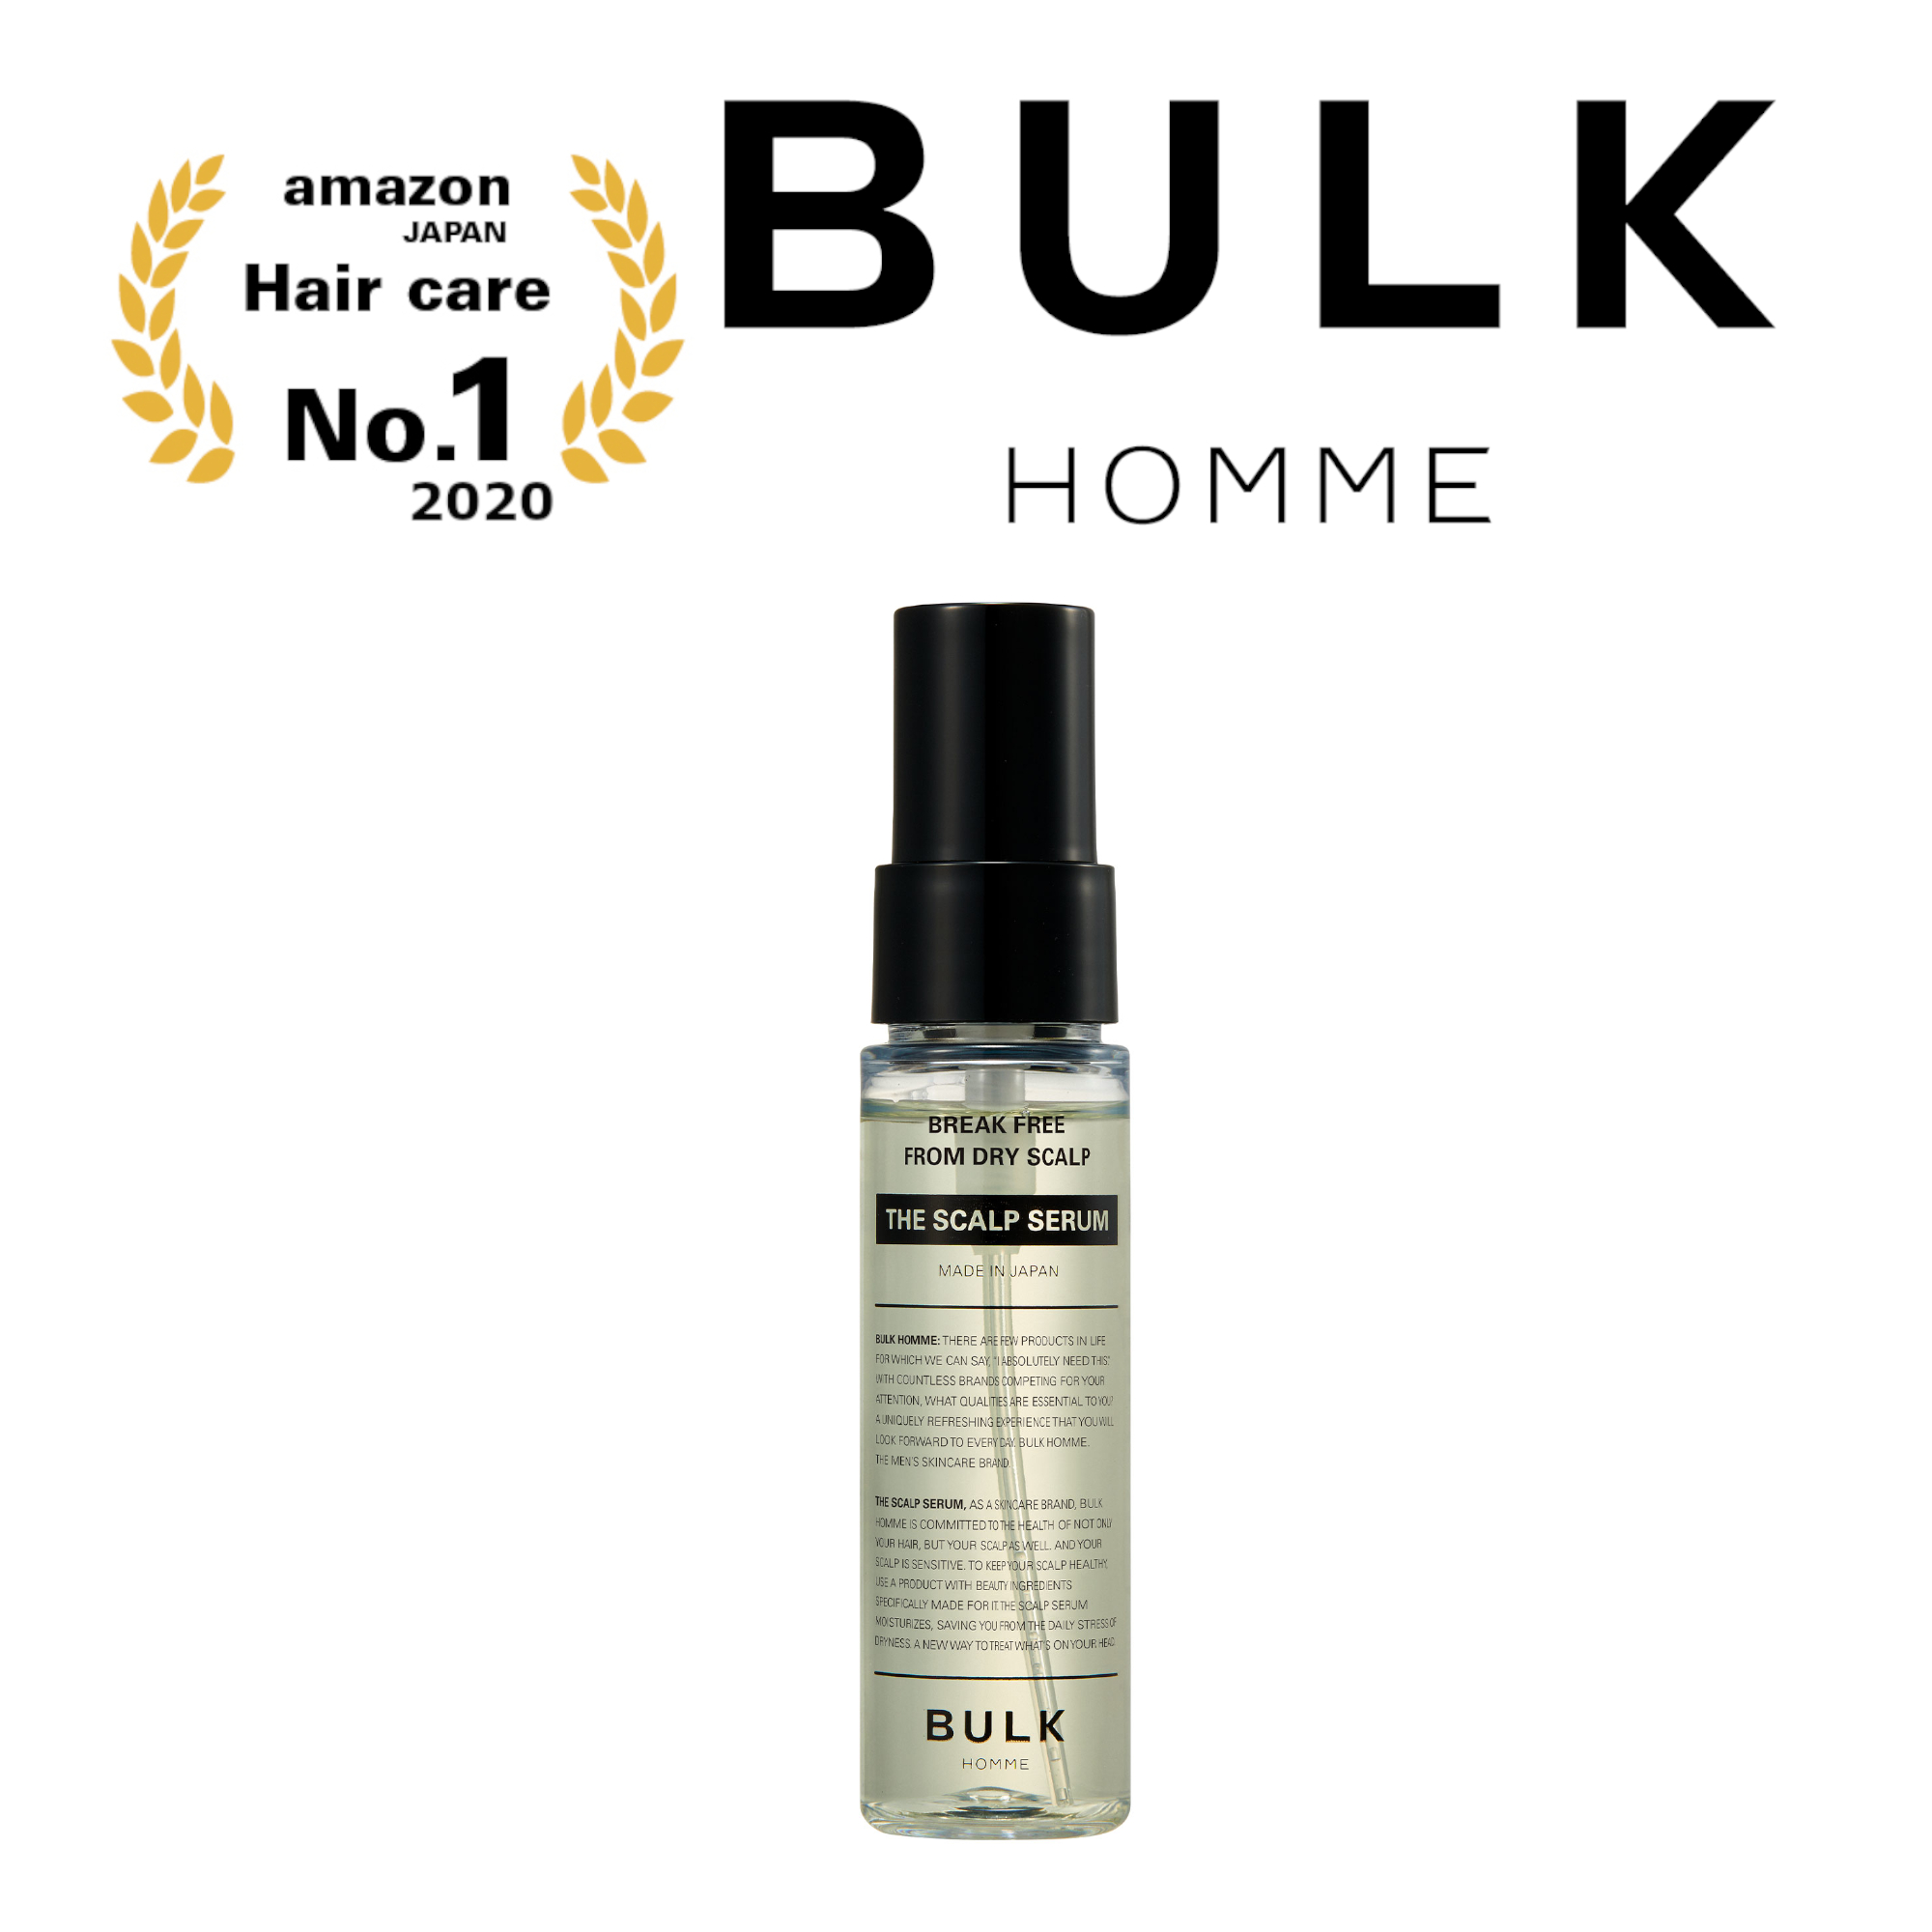 BULK HOMME THE SCALP SERUM | Men's hair care treatment 50ml | MADE IN JAPAN  after bath hair serum | highly concentrated collagen, Miracle apple  extract, Hydrogenated great plant-based ingredients feel refreshing |